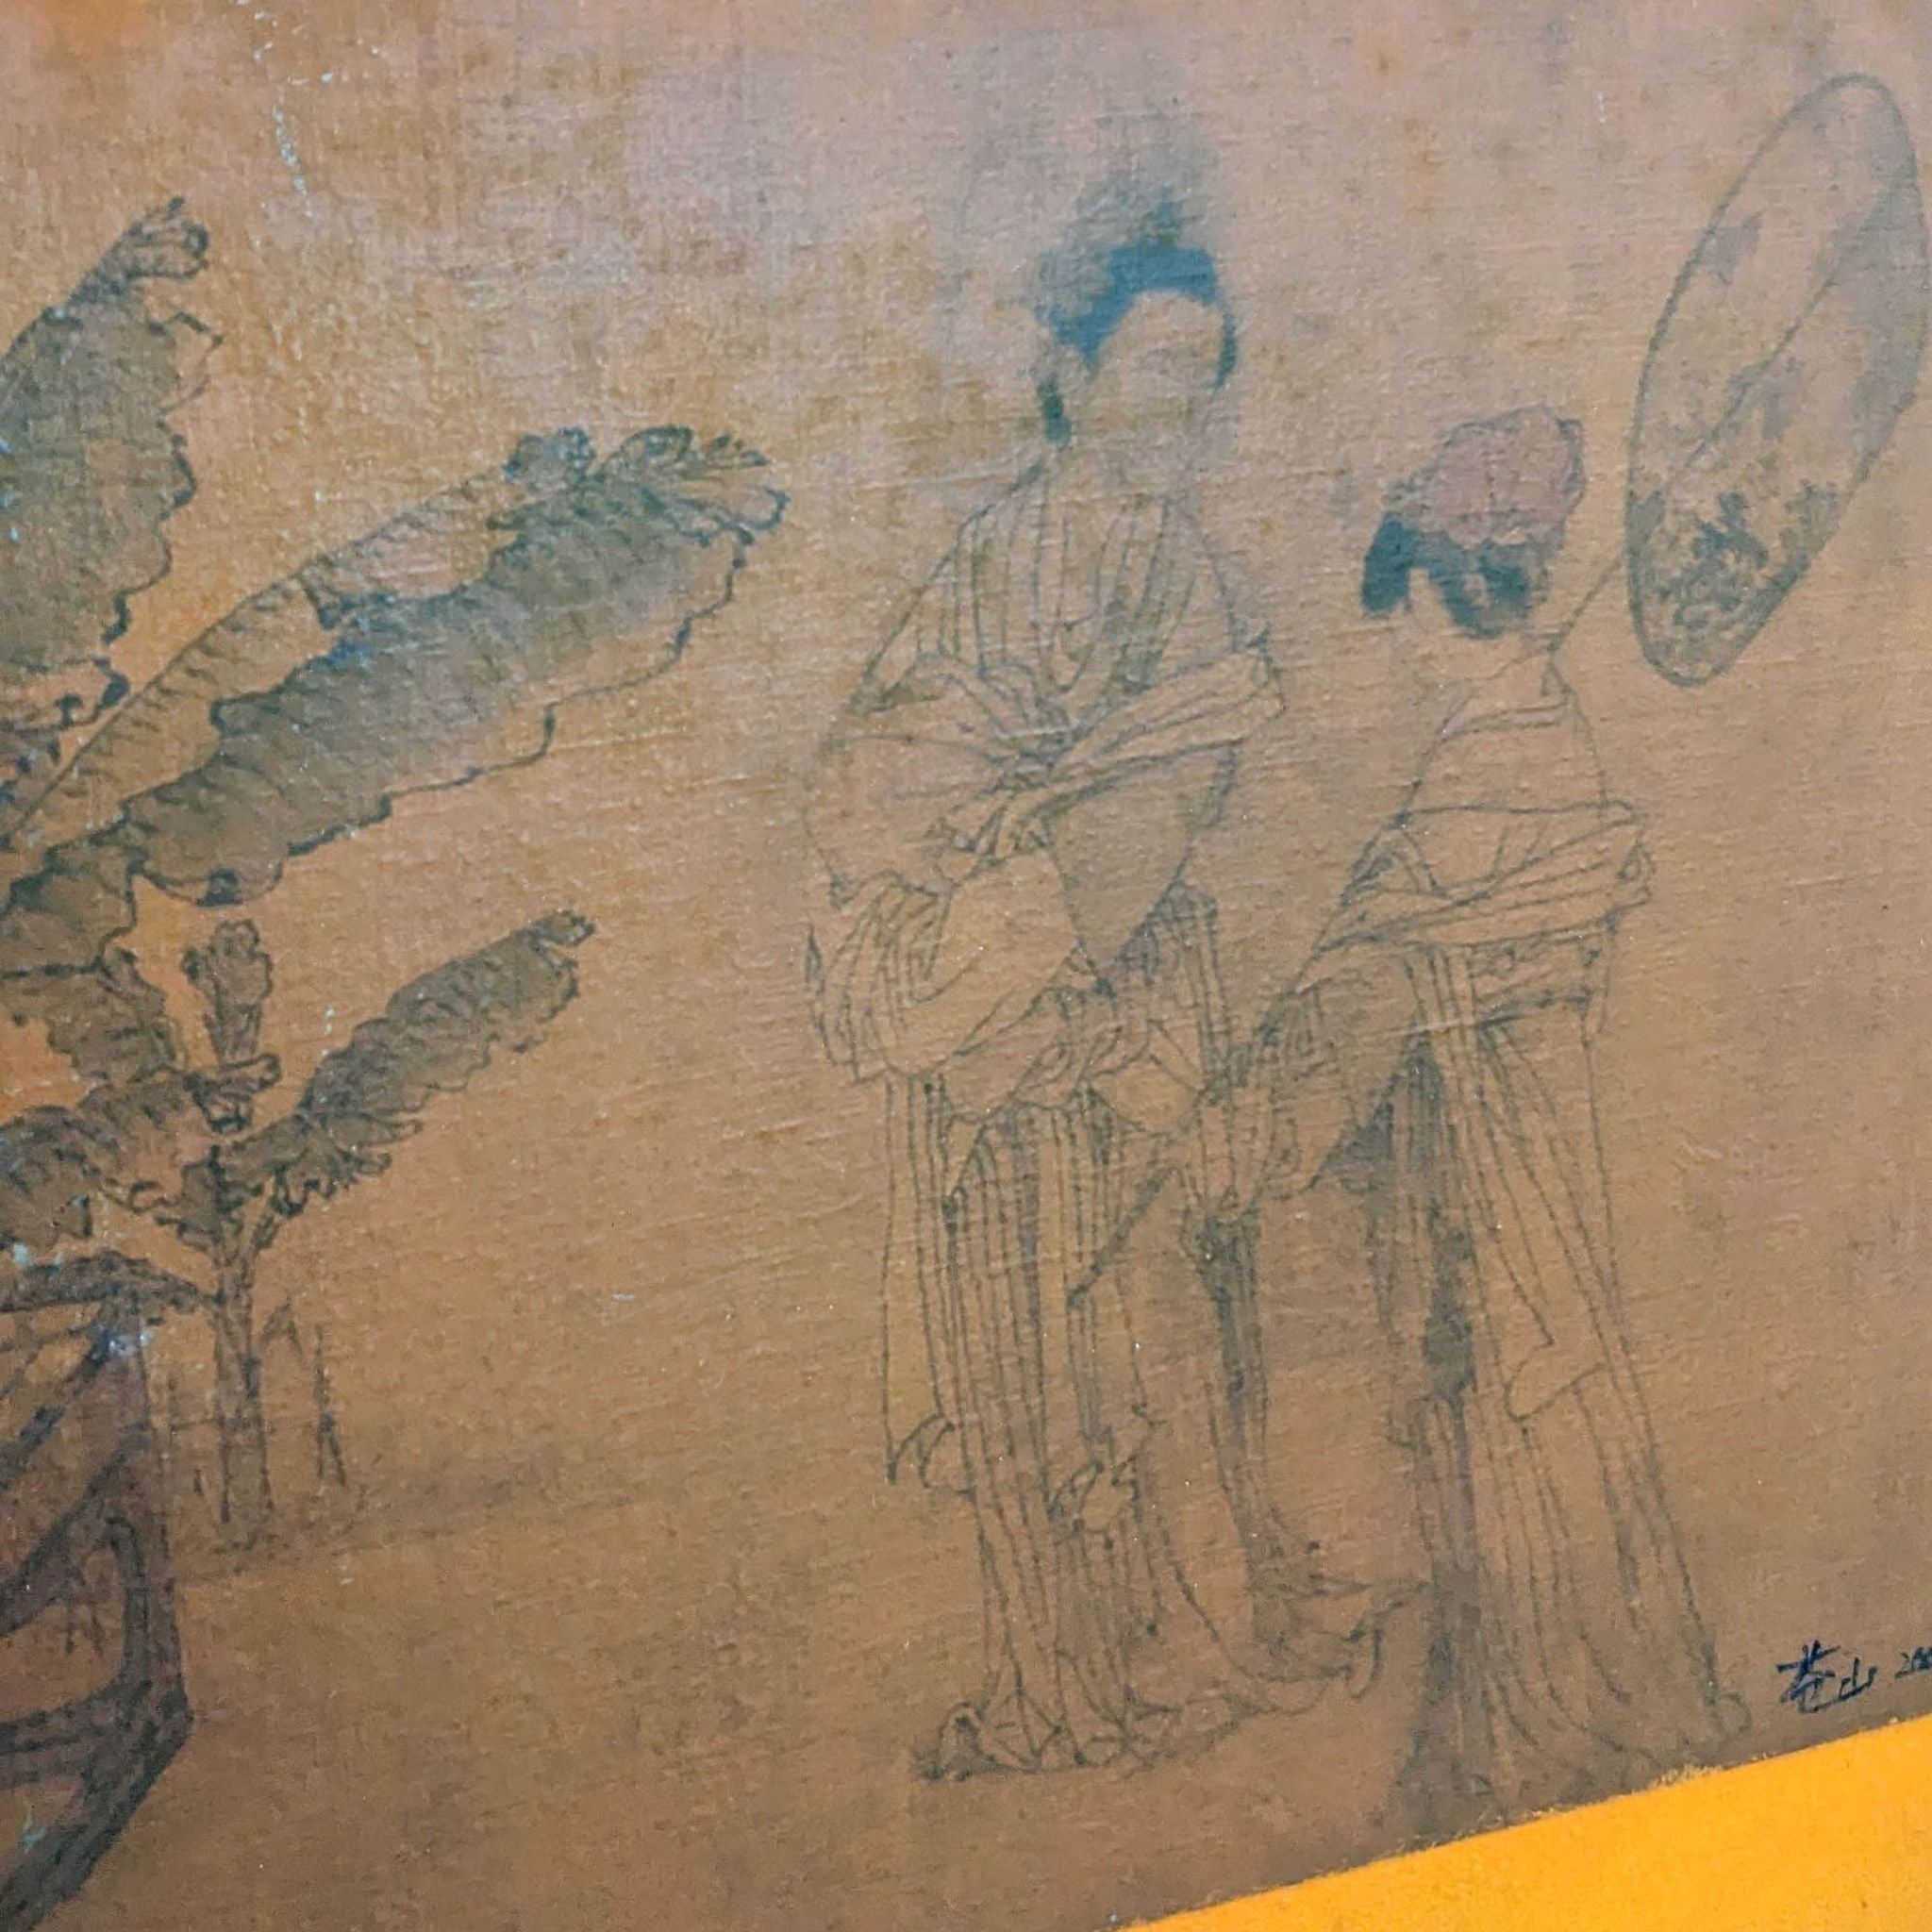 "Antique-style Asian drawing of two figures in traditional attire with plants, on a brown canvas, signed by artist."